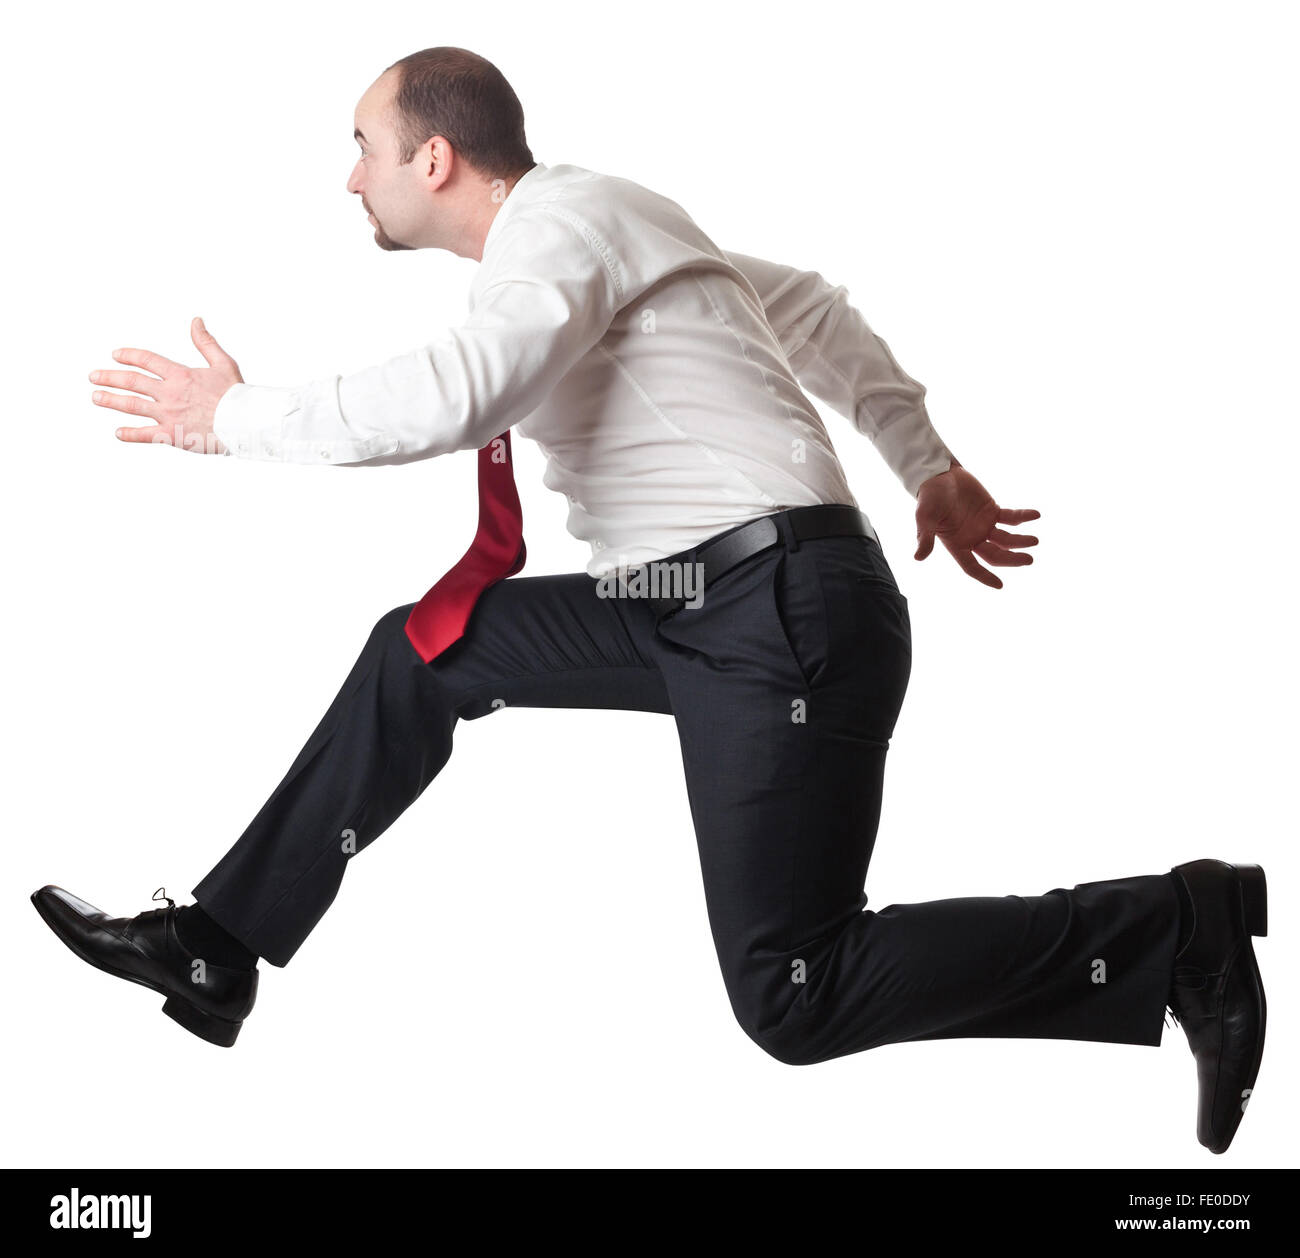 jumping man isolated on white Stock Photo